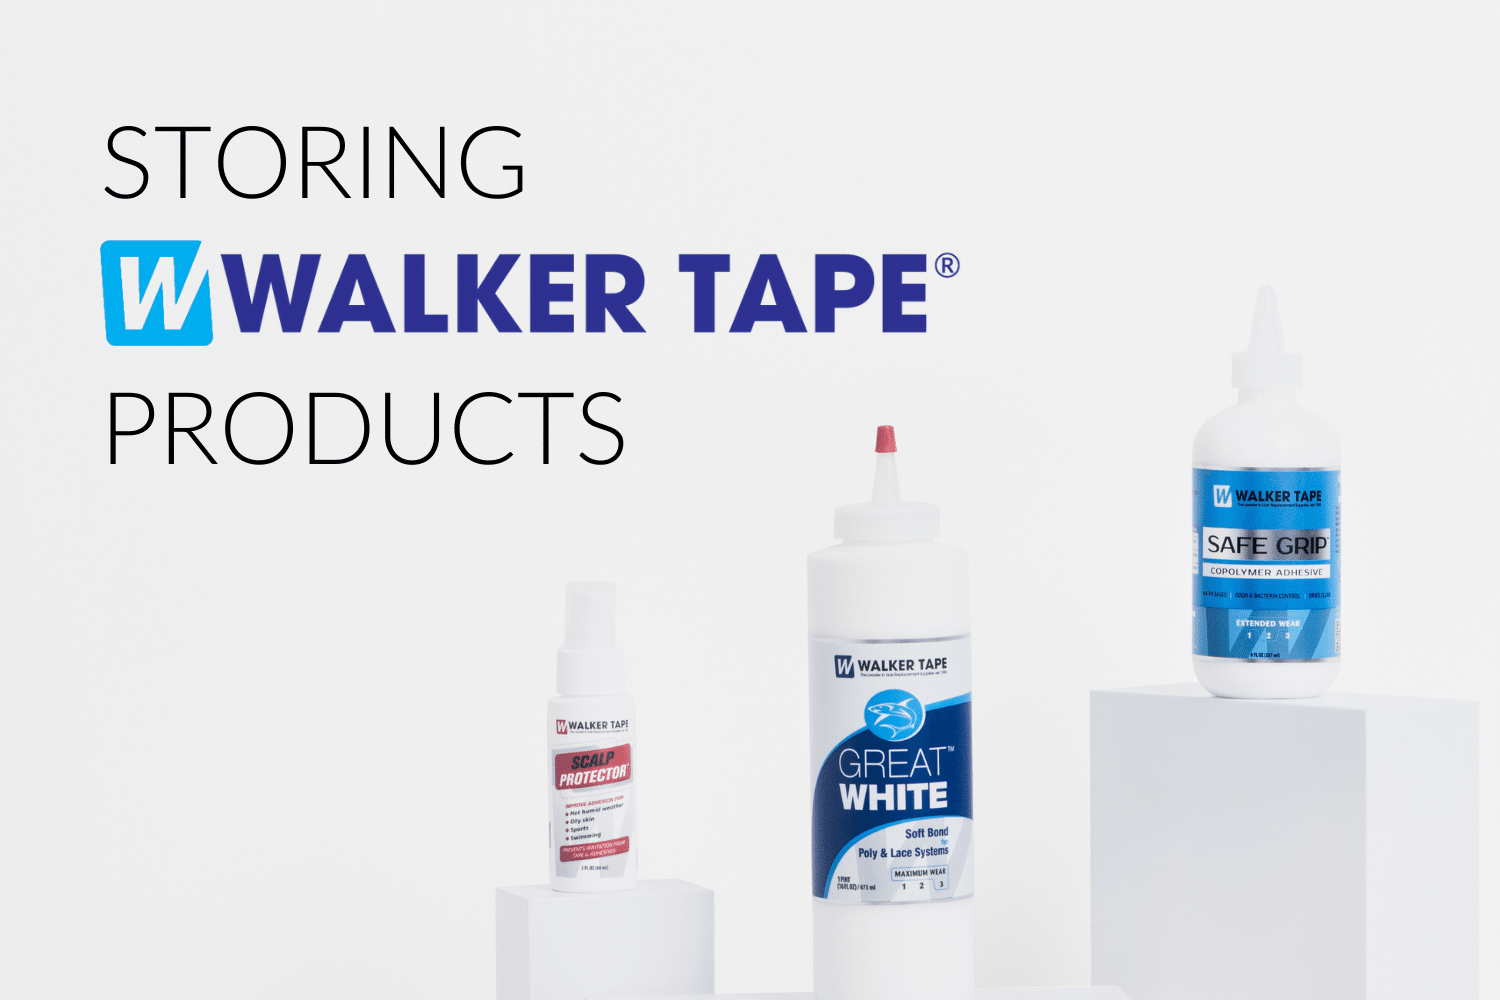 Storing Walker Tape® Products